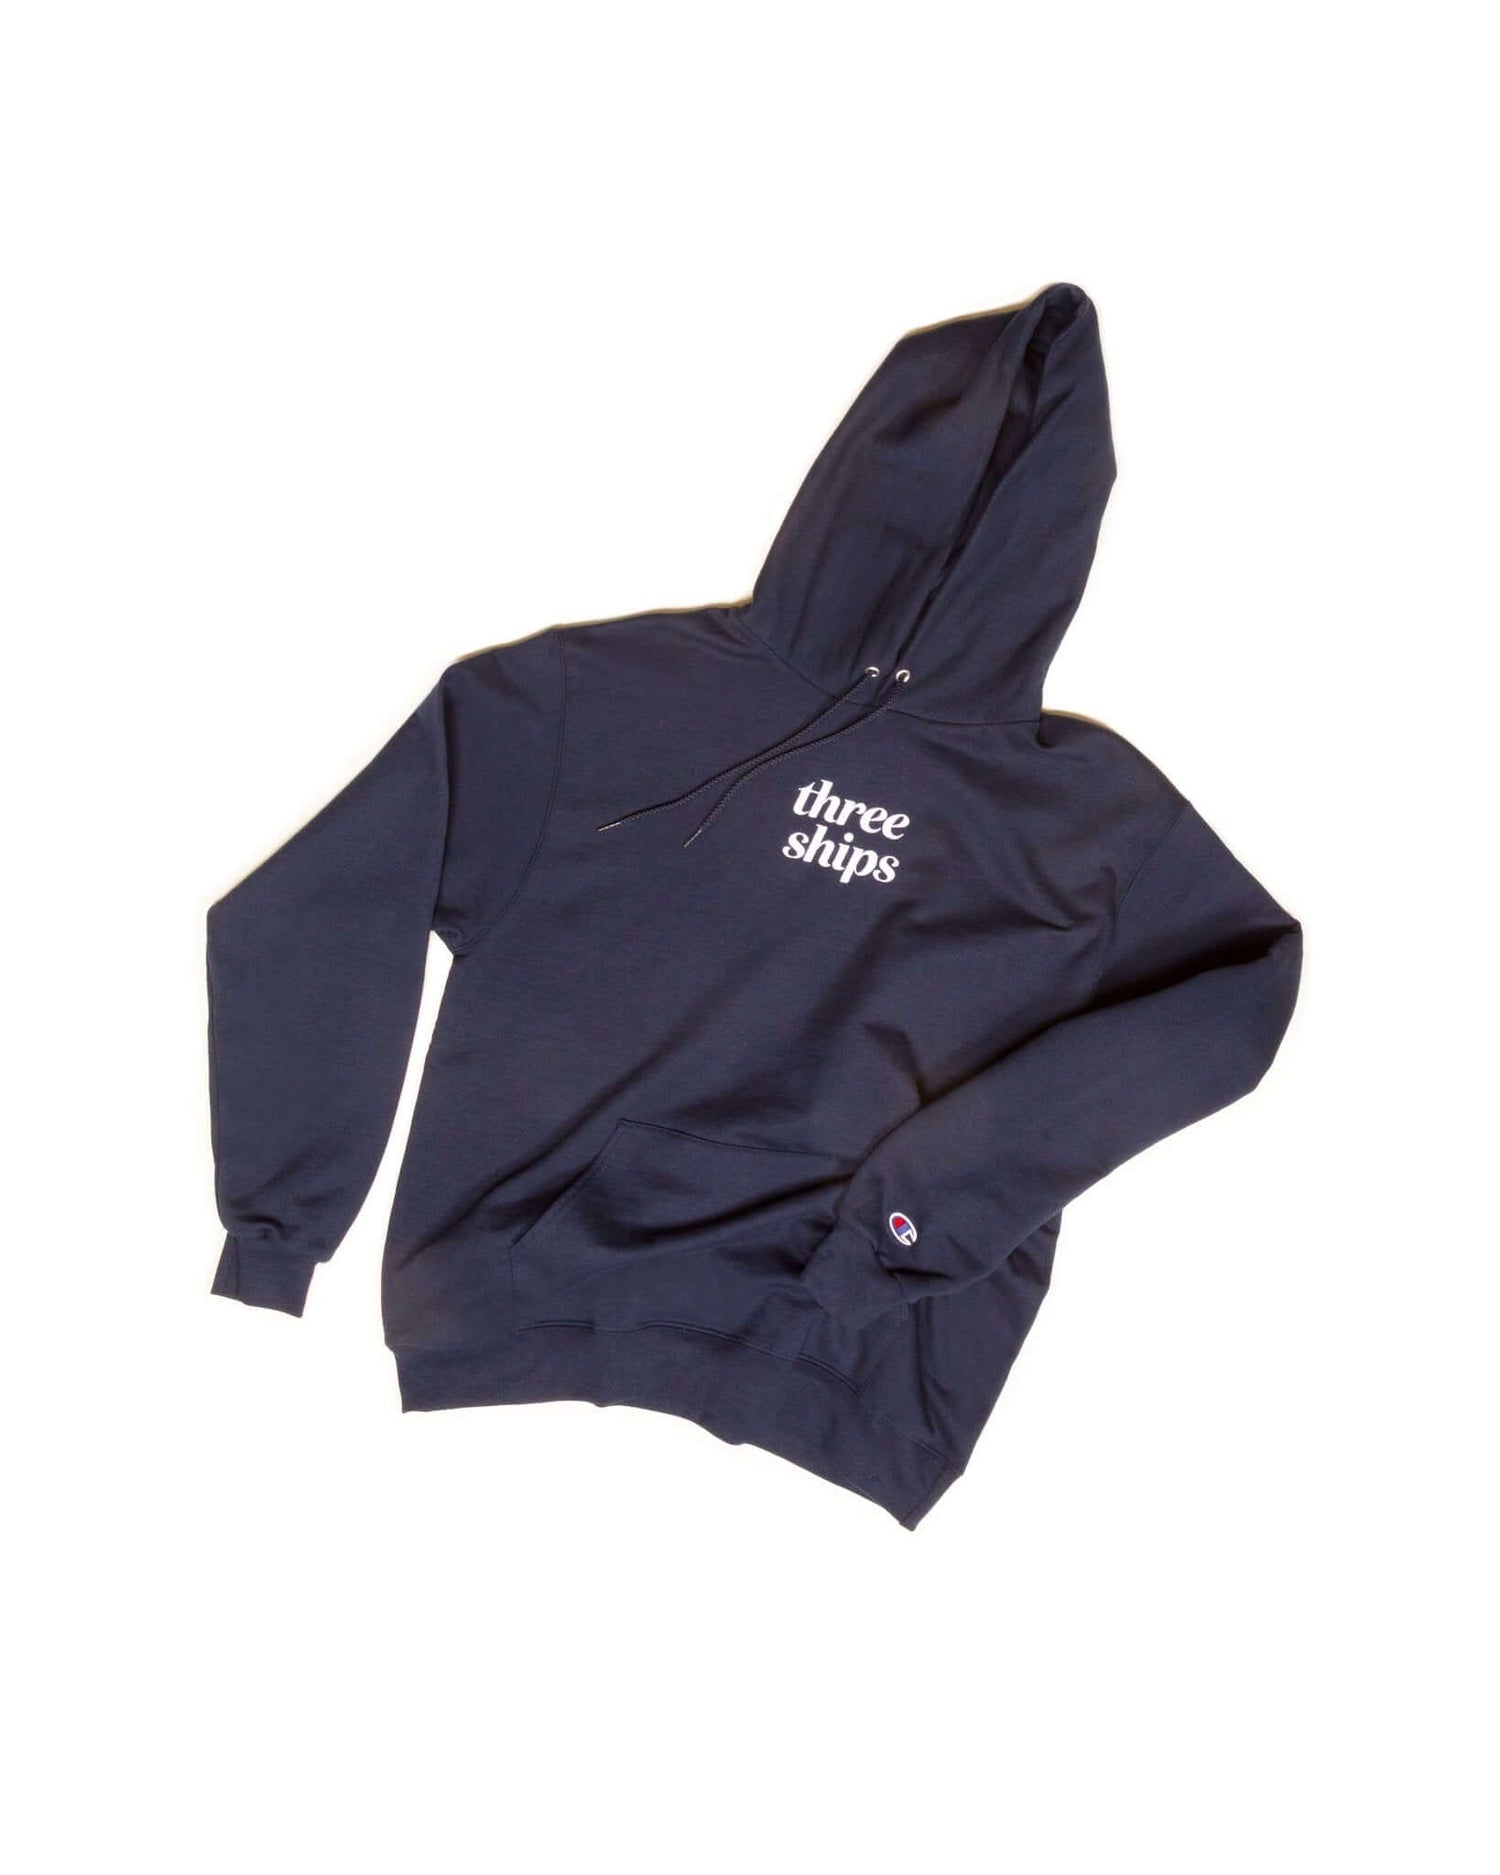 Navy Three Ships Embroidered Hoodie